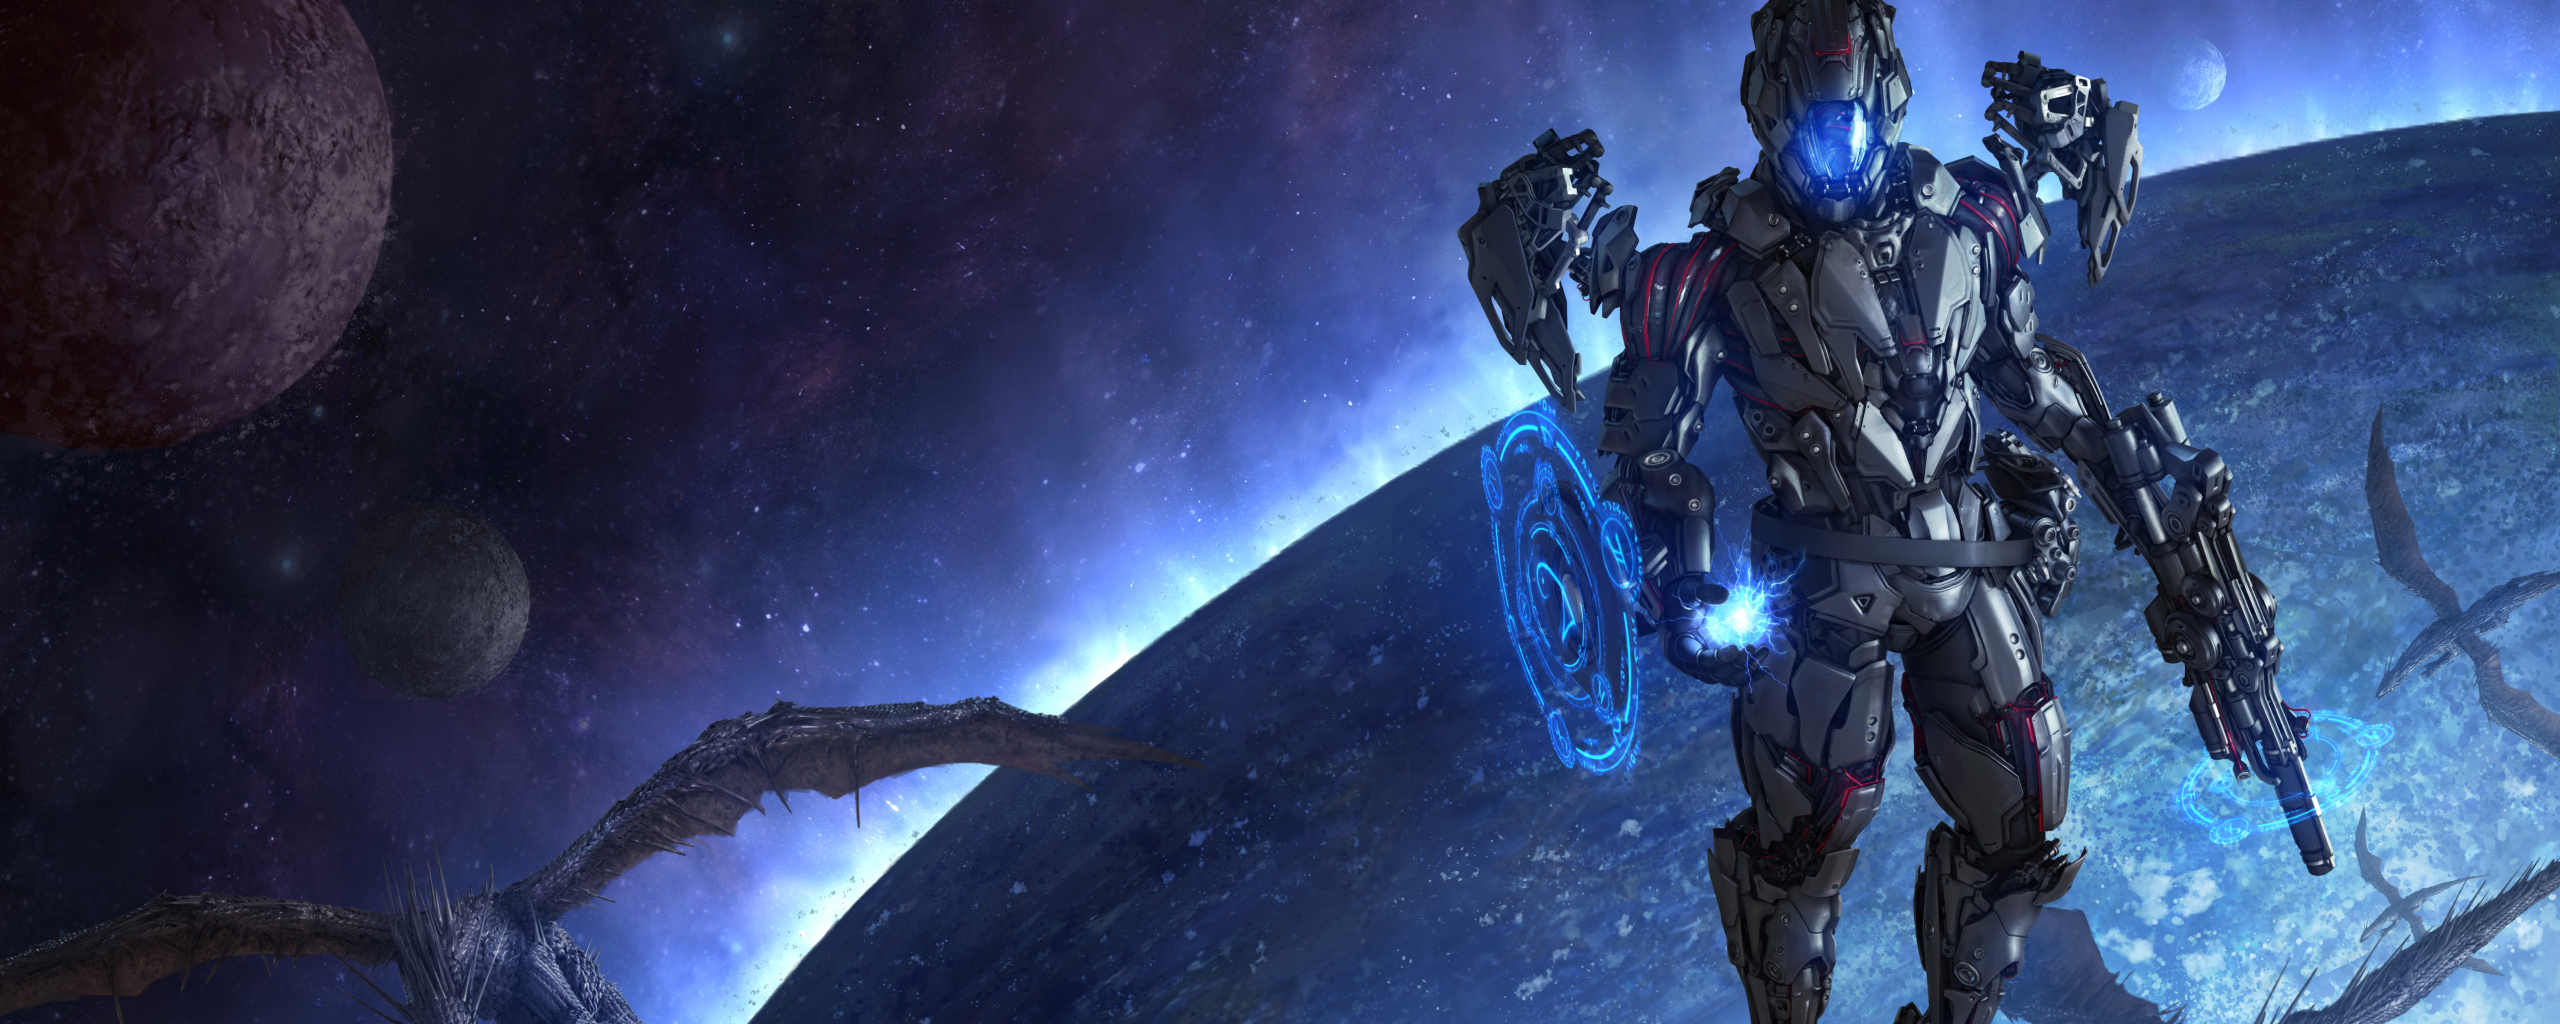 2560x1024 Dragons Scifi Space Cyborg Space 2560x1024 Resolution ...